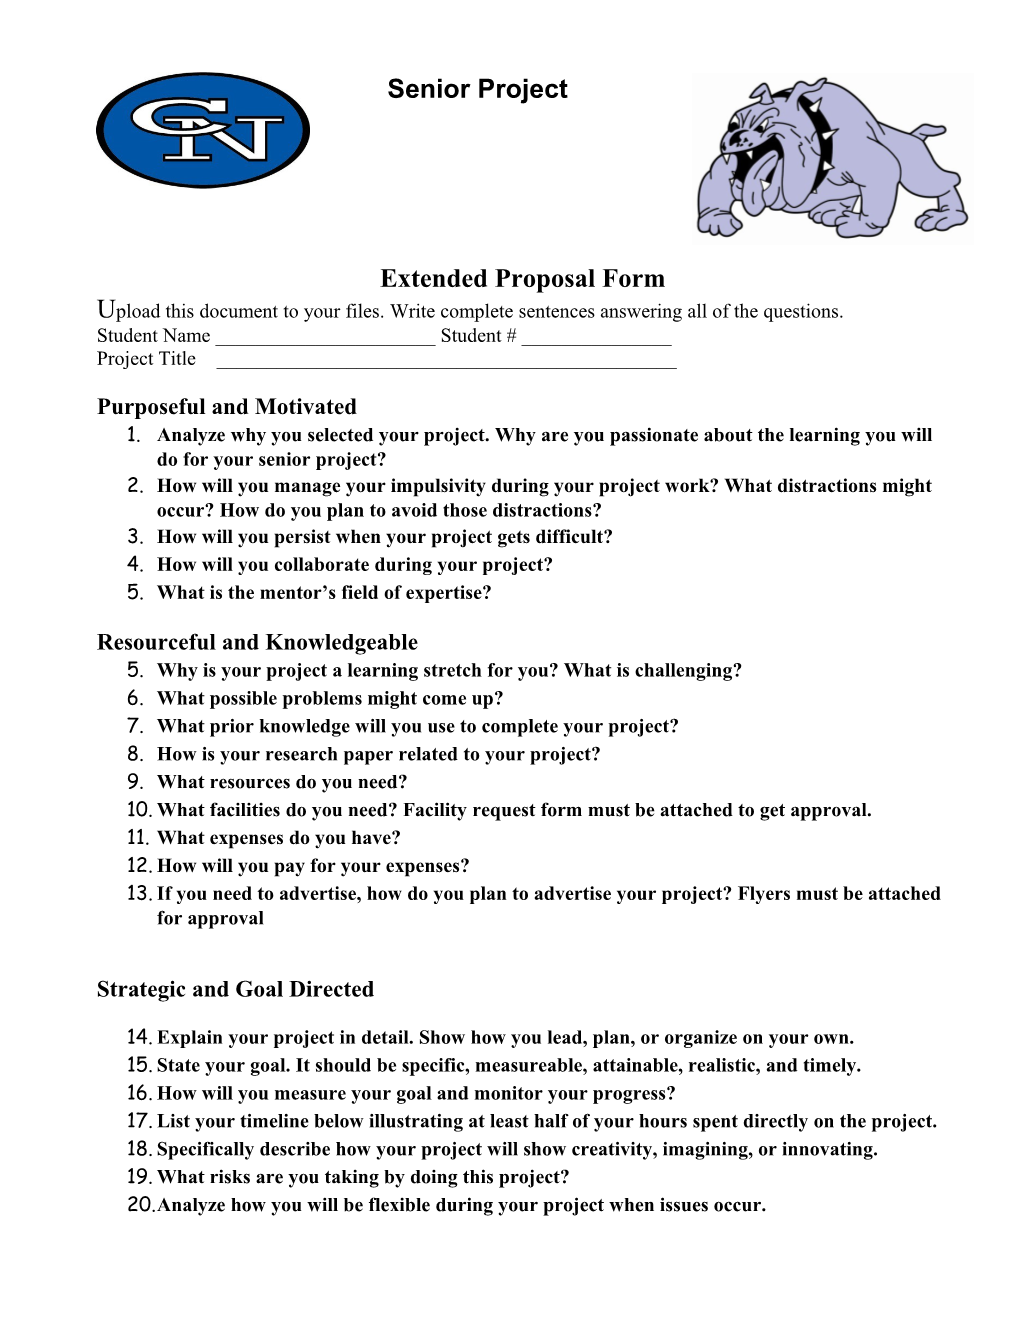 Extended Proposal Form